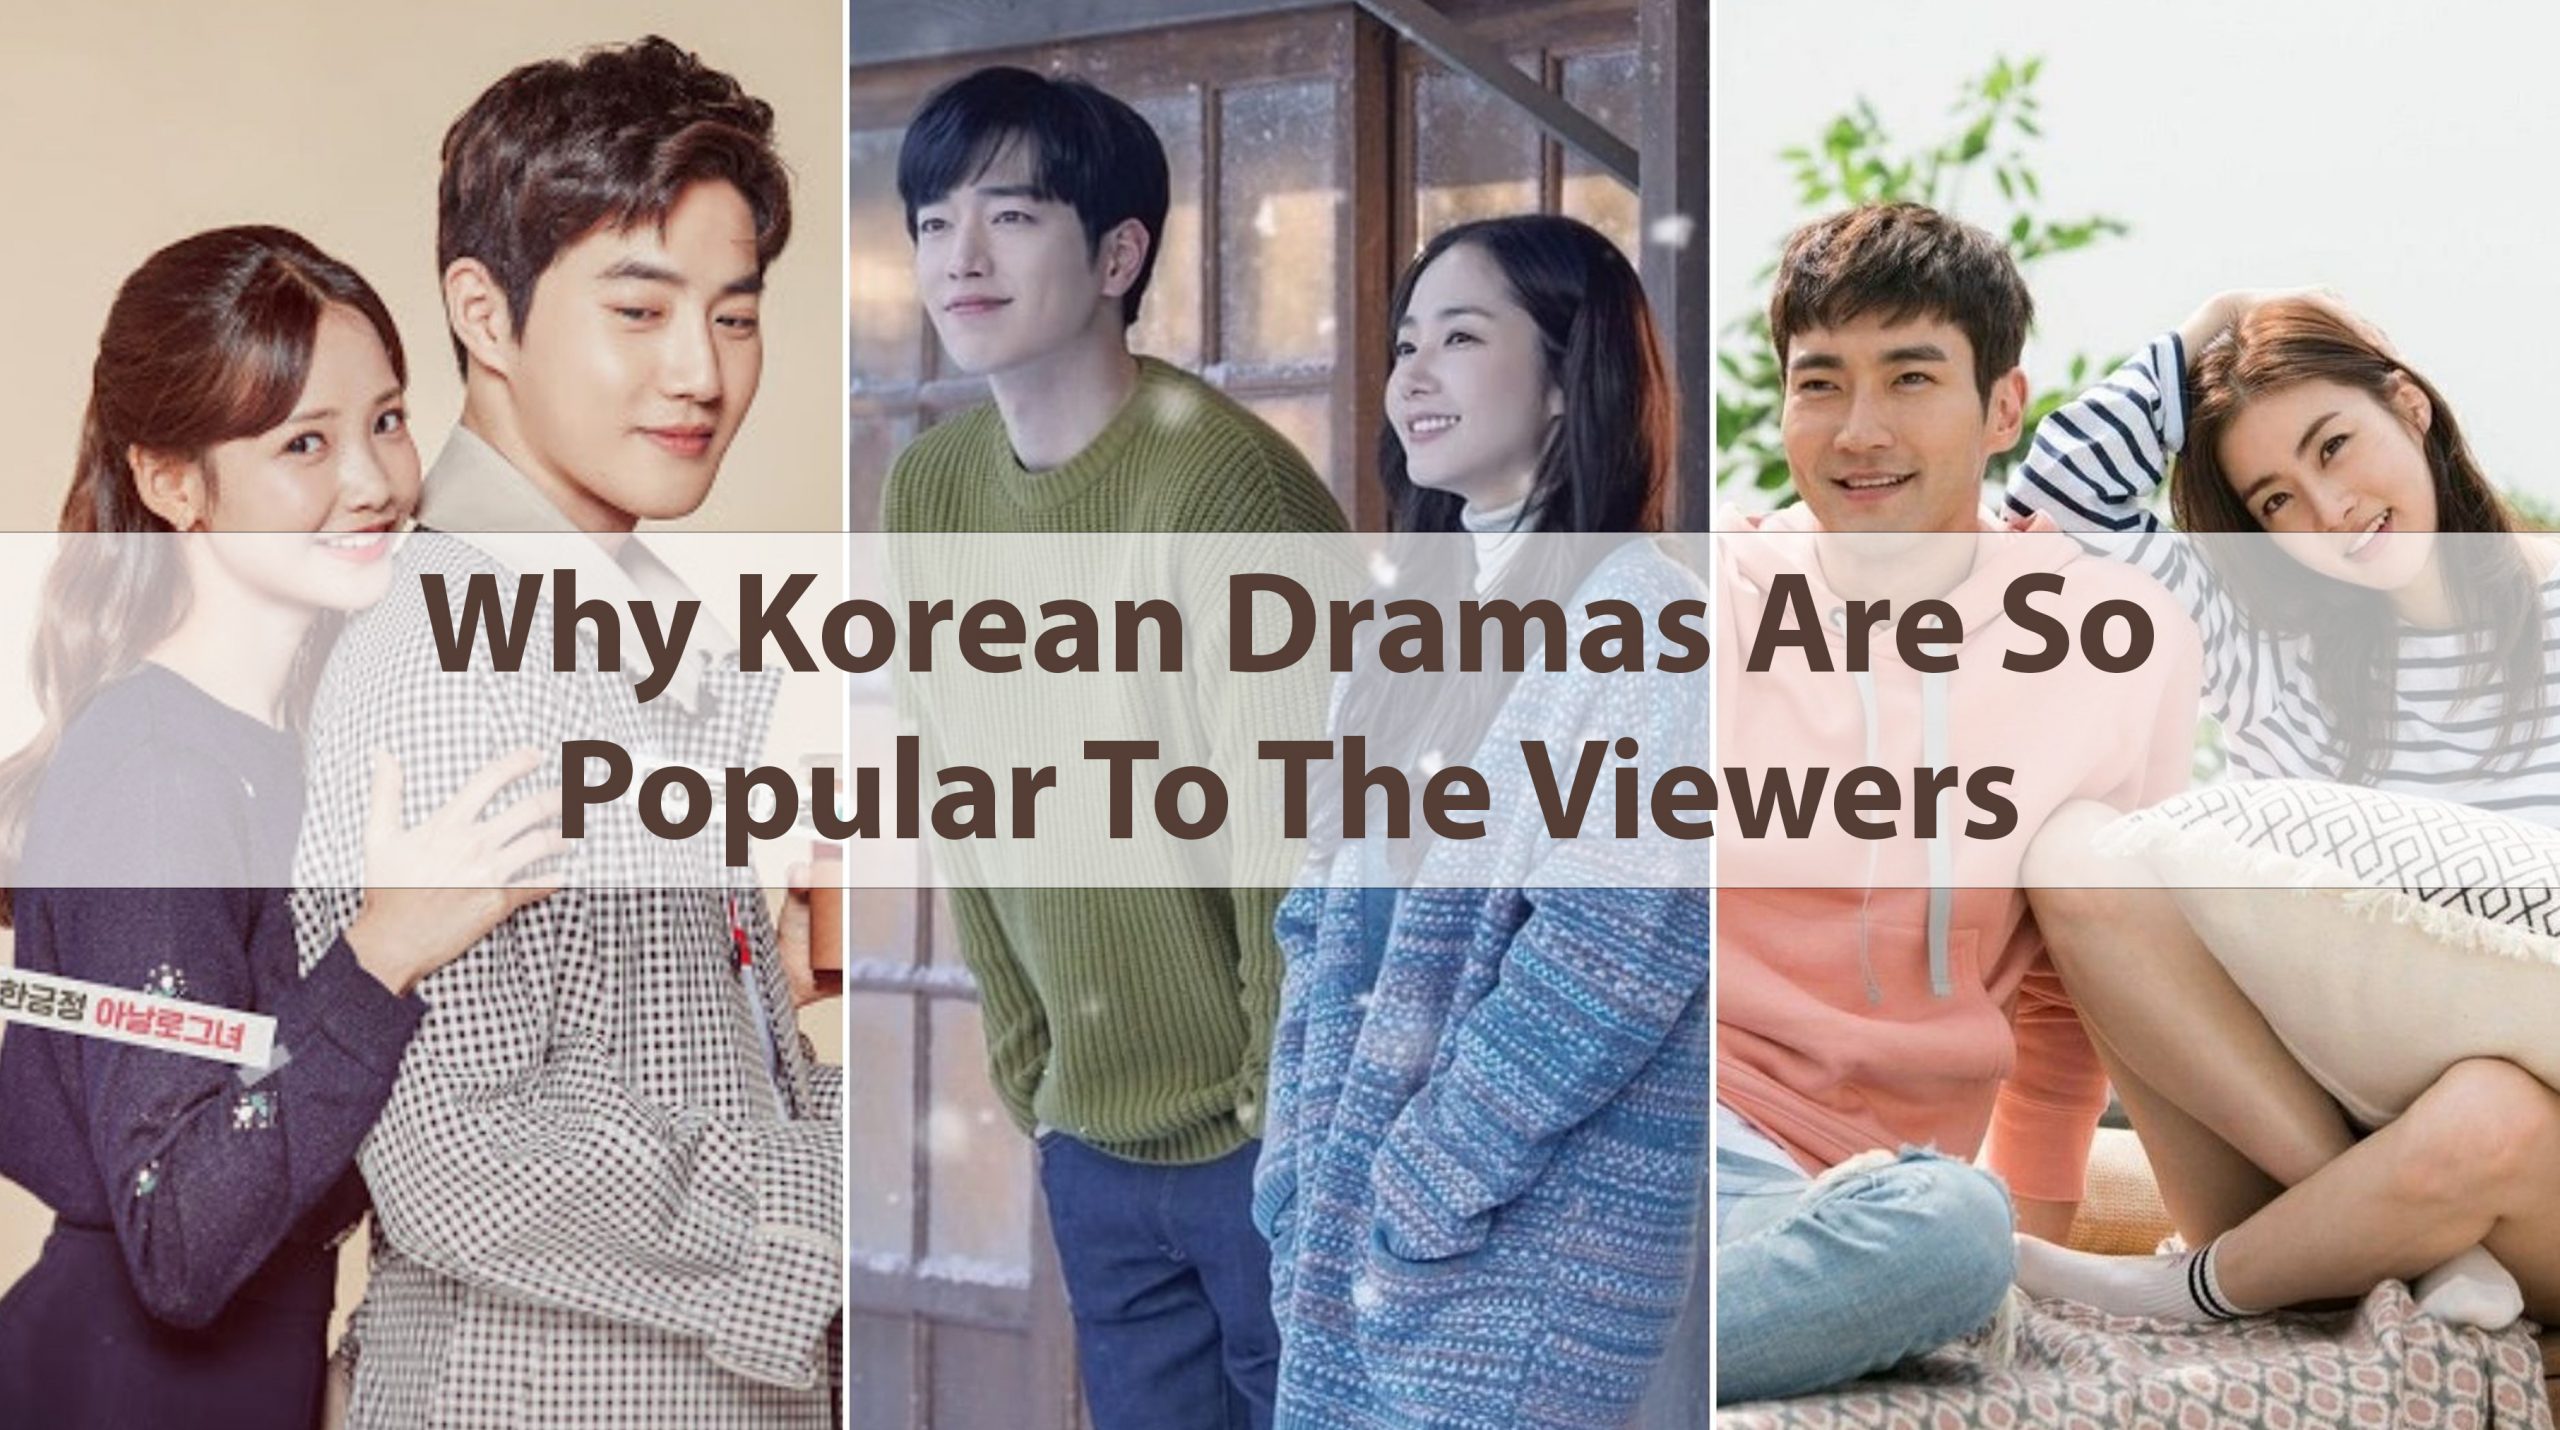 10 Reasons Why Korean Dramas Are So Popular To The Viewers: Expert Explanation